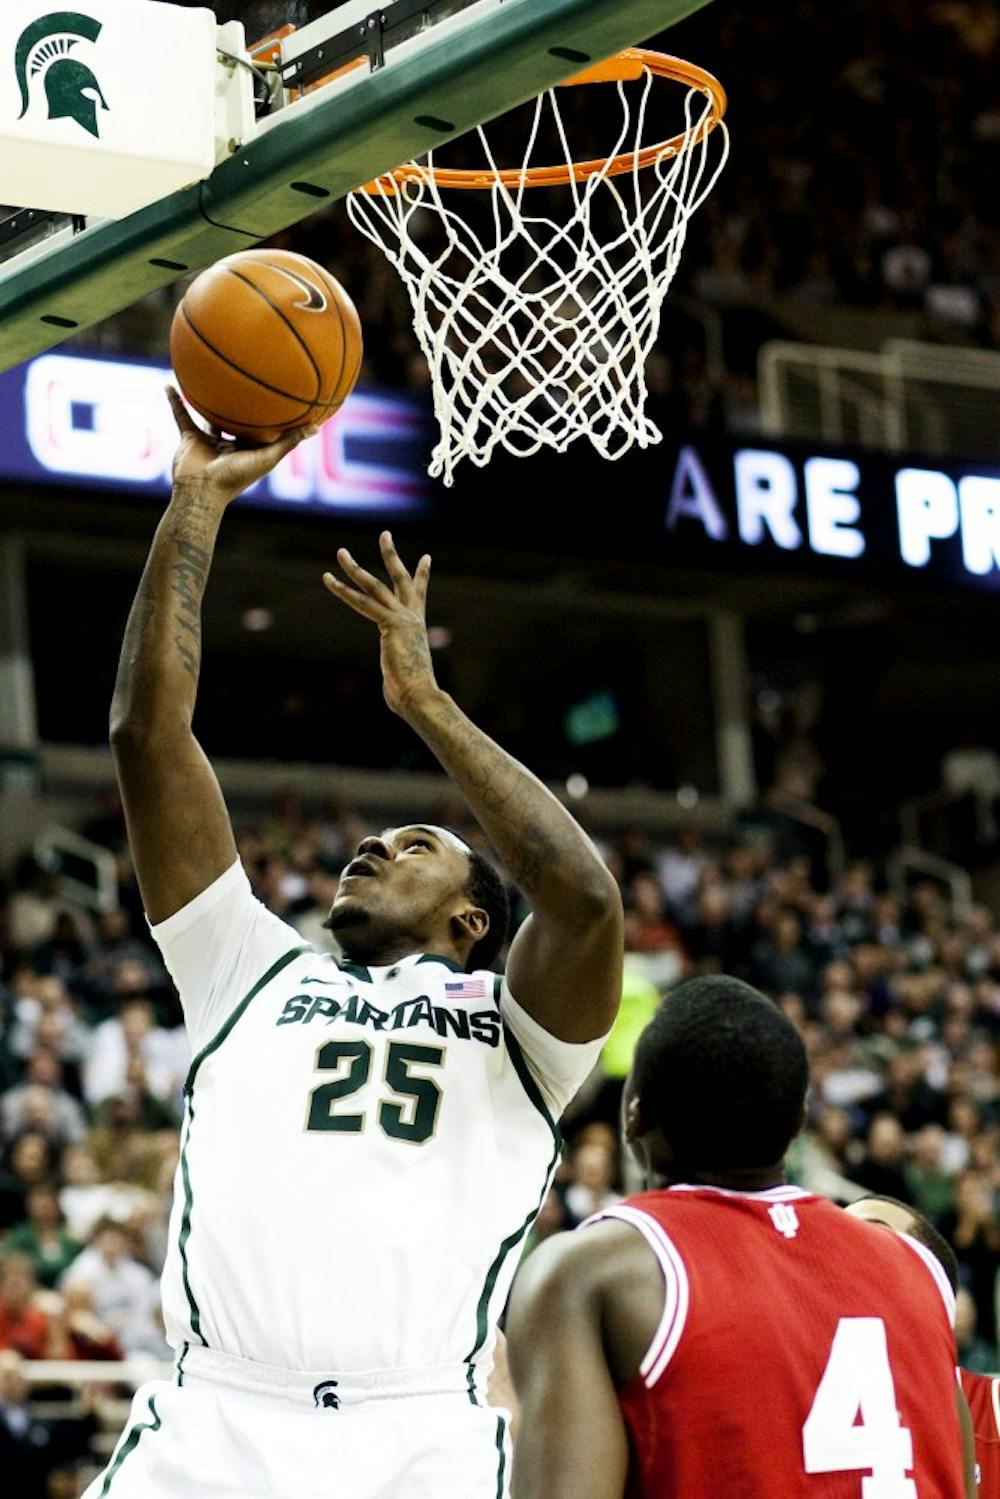 Junior center Derrick Nix gets past Indiana defenders for a layup Wednesday night at Breslin Center. Nix netted 14 points for the Spartans in the 80-65 victory over the Hoosiers. Matt Hallowell/The State News